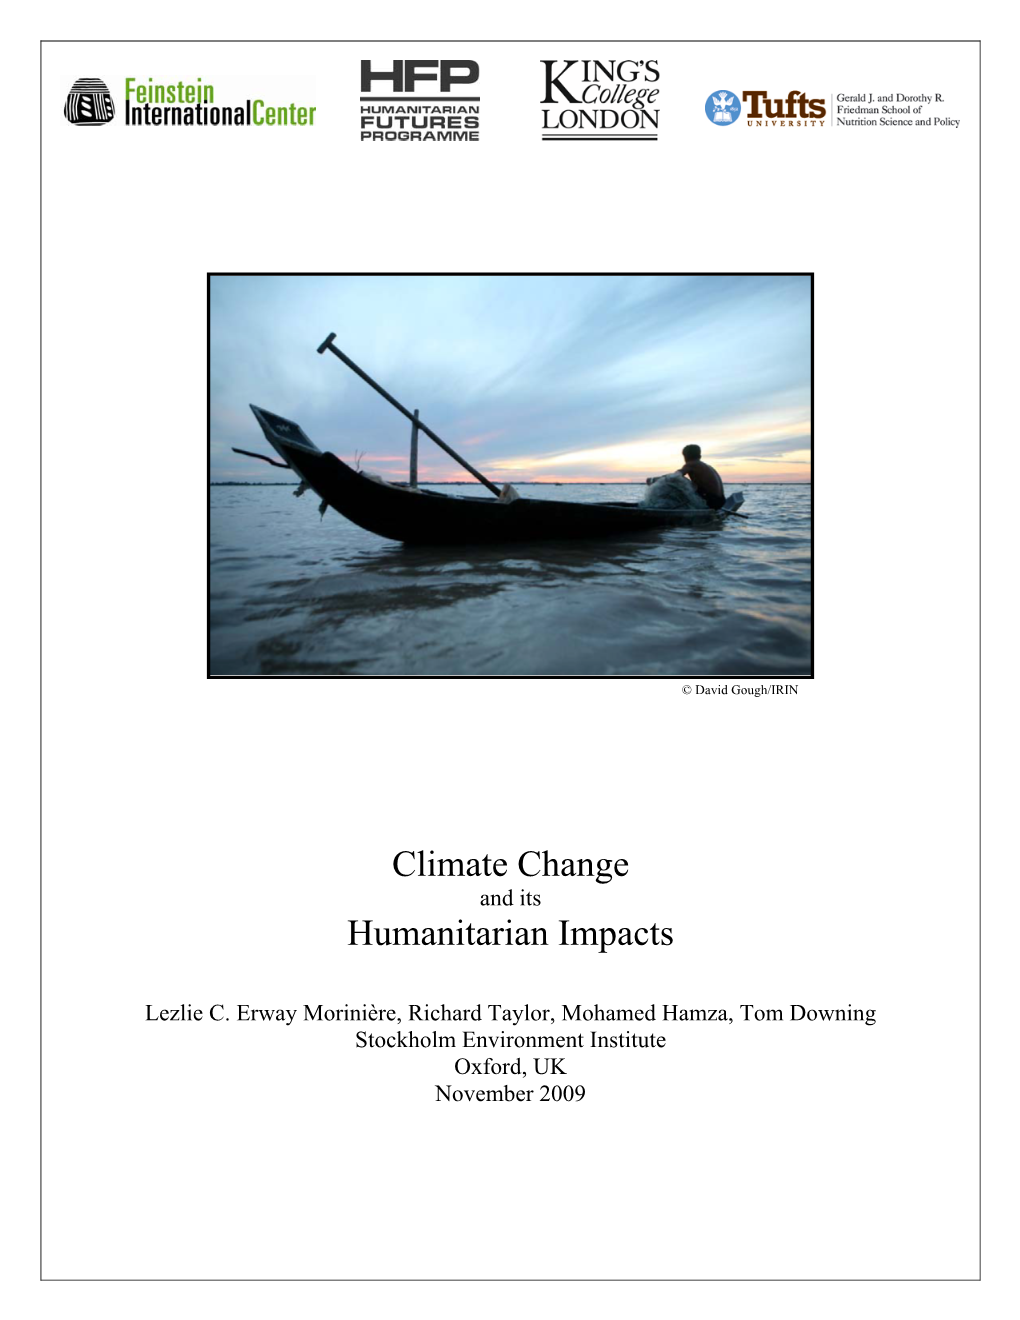 Climate Change and Its Humanitarian Impacts